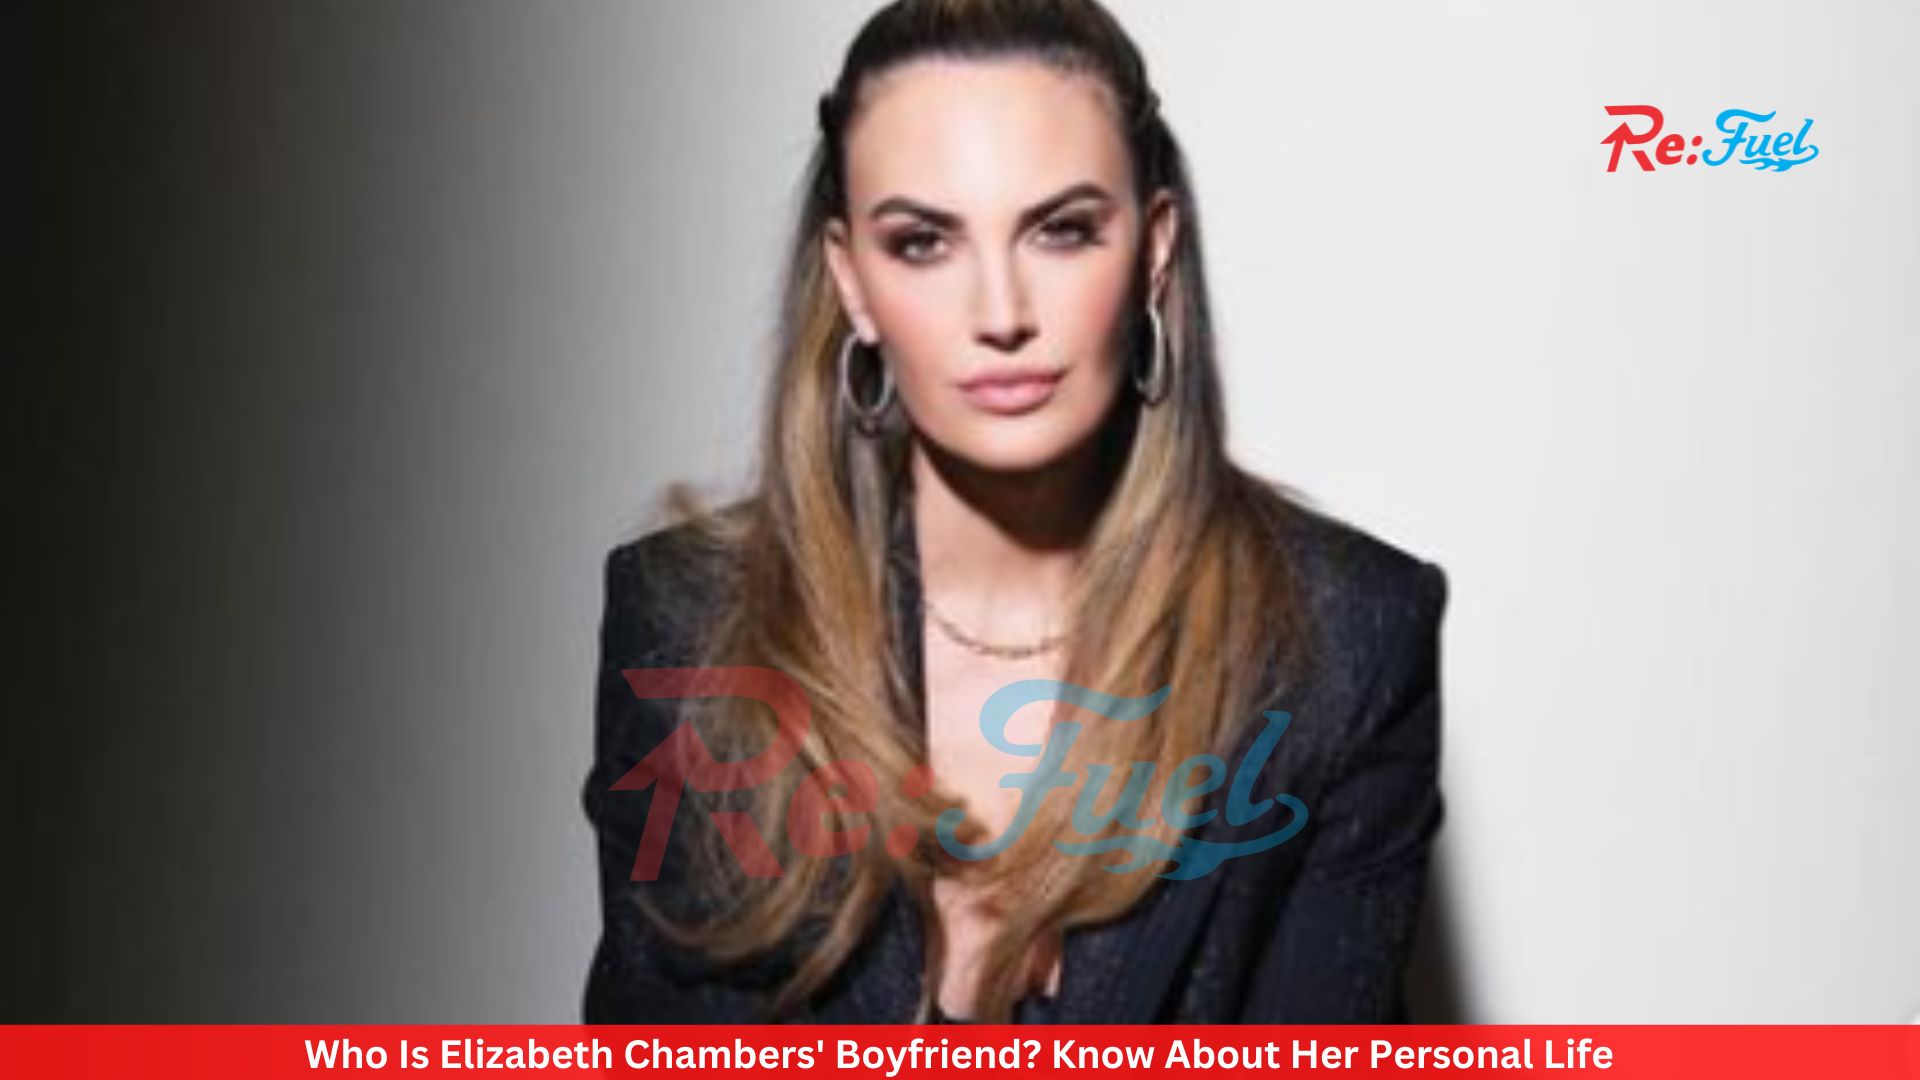 Who Is Elizabeth Chambers' Boyfriend? Know About Her Personal Life